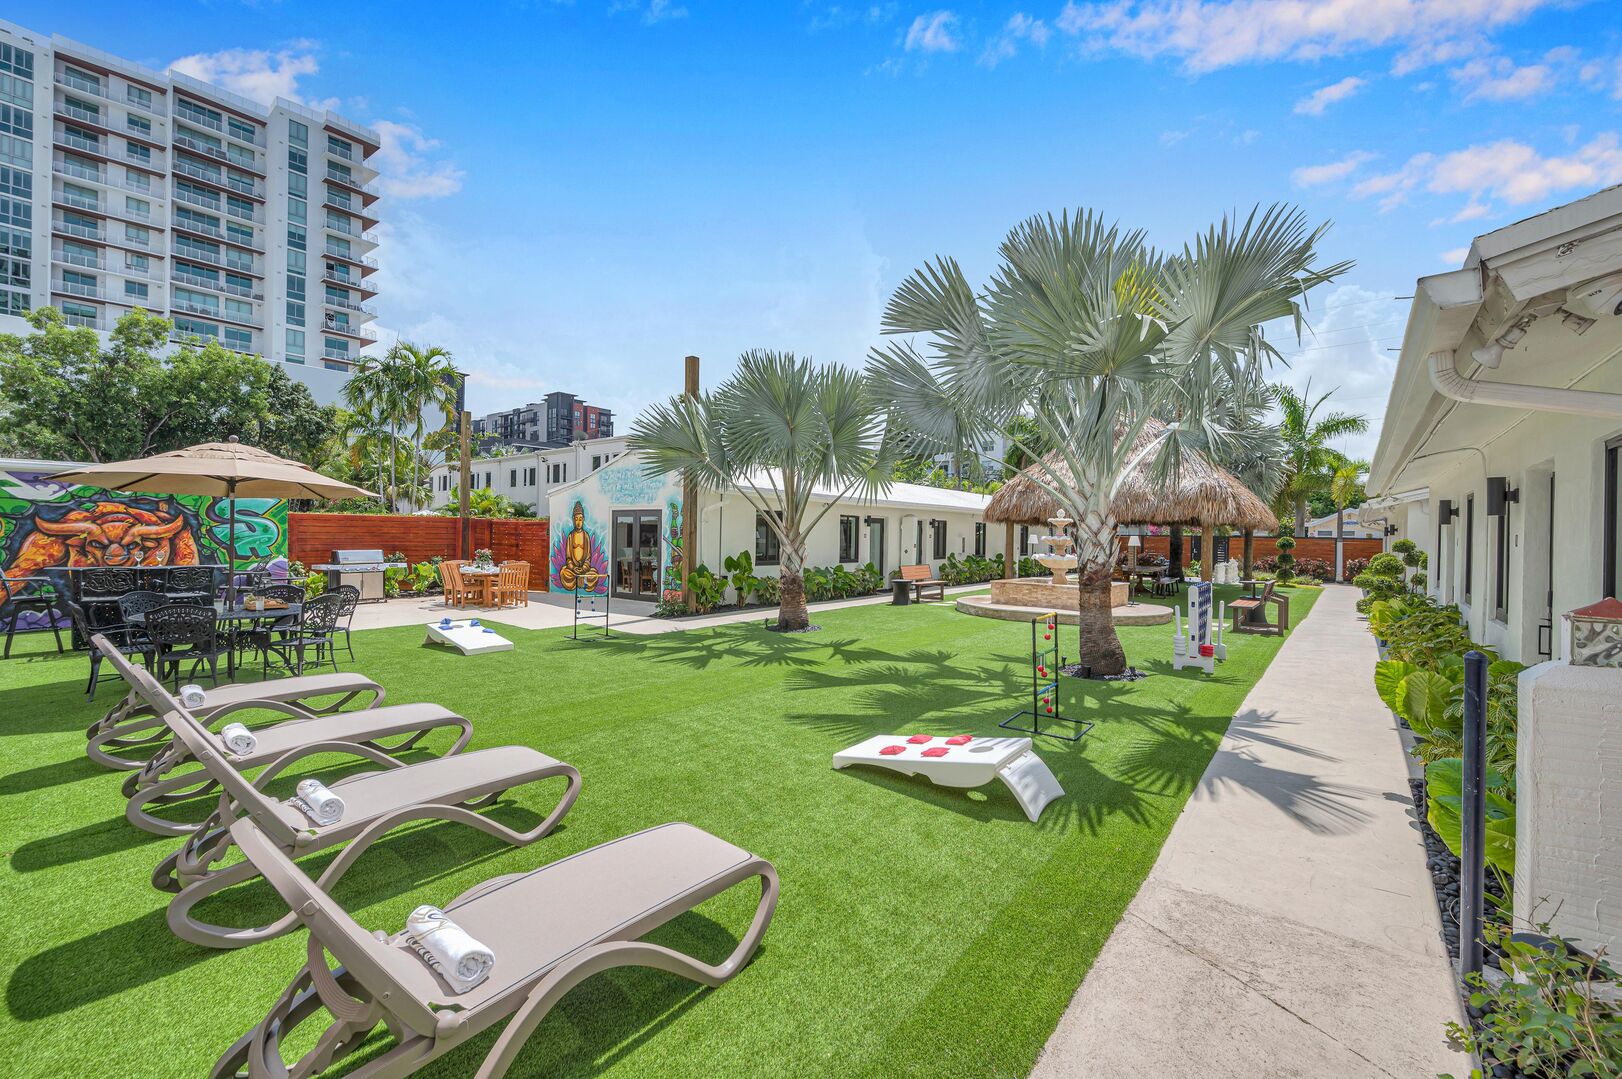 This eclectic urban oasis is one of seven suites surrounding a garden that features wall murals, a tiki gazebo, a giant chess board, mini golf, a hot tub, a grill, as well as many lounging and dining areas.